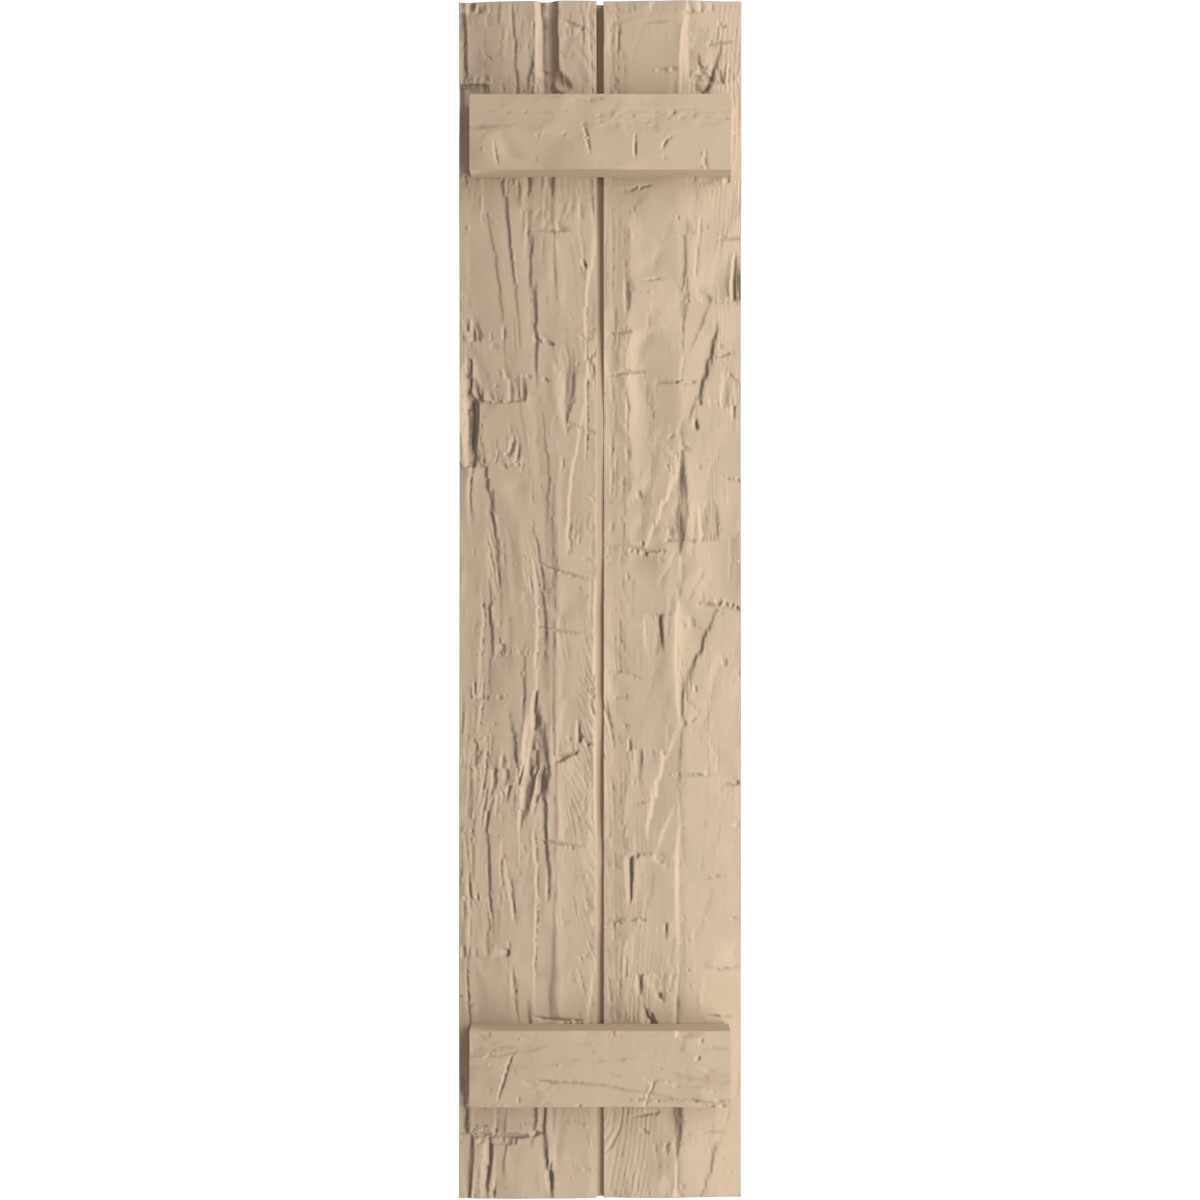 Ekena Millwork Timberthane 2-Pack 11-in W x 48-in H Hand Hewn Paintable ...